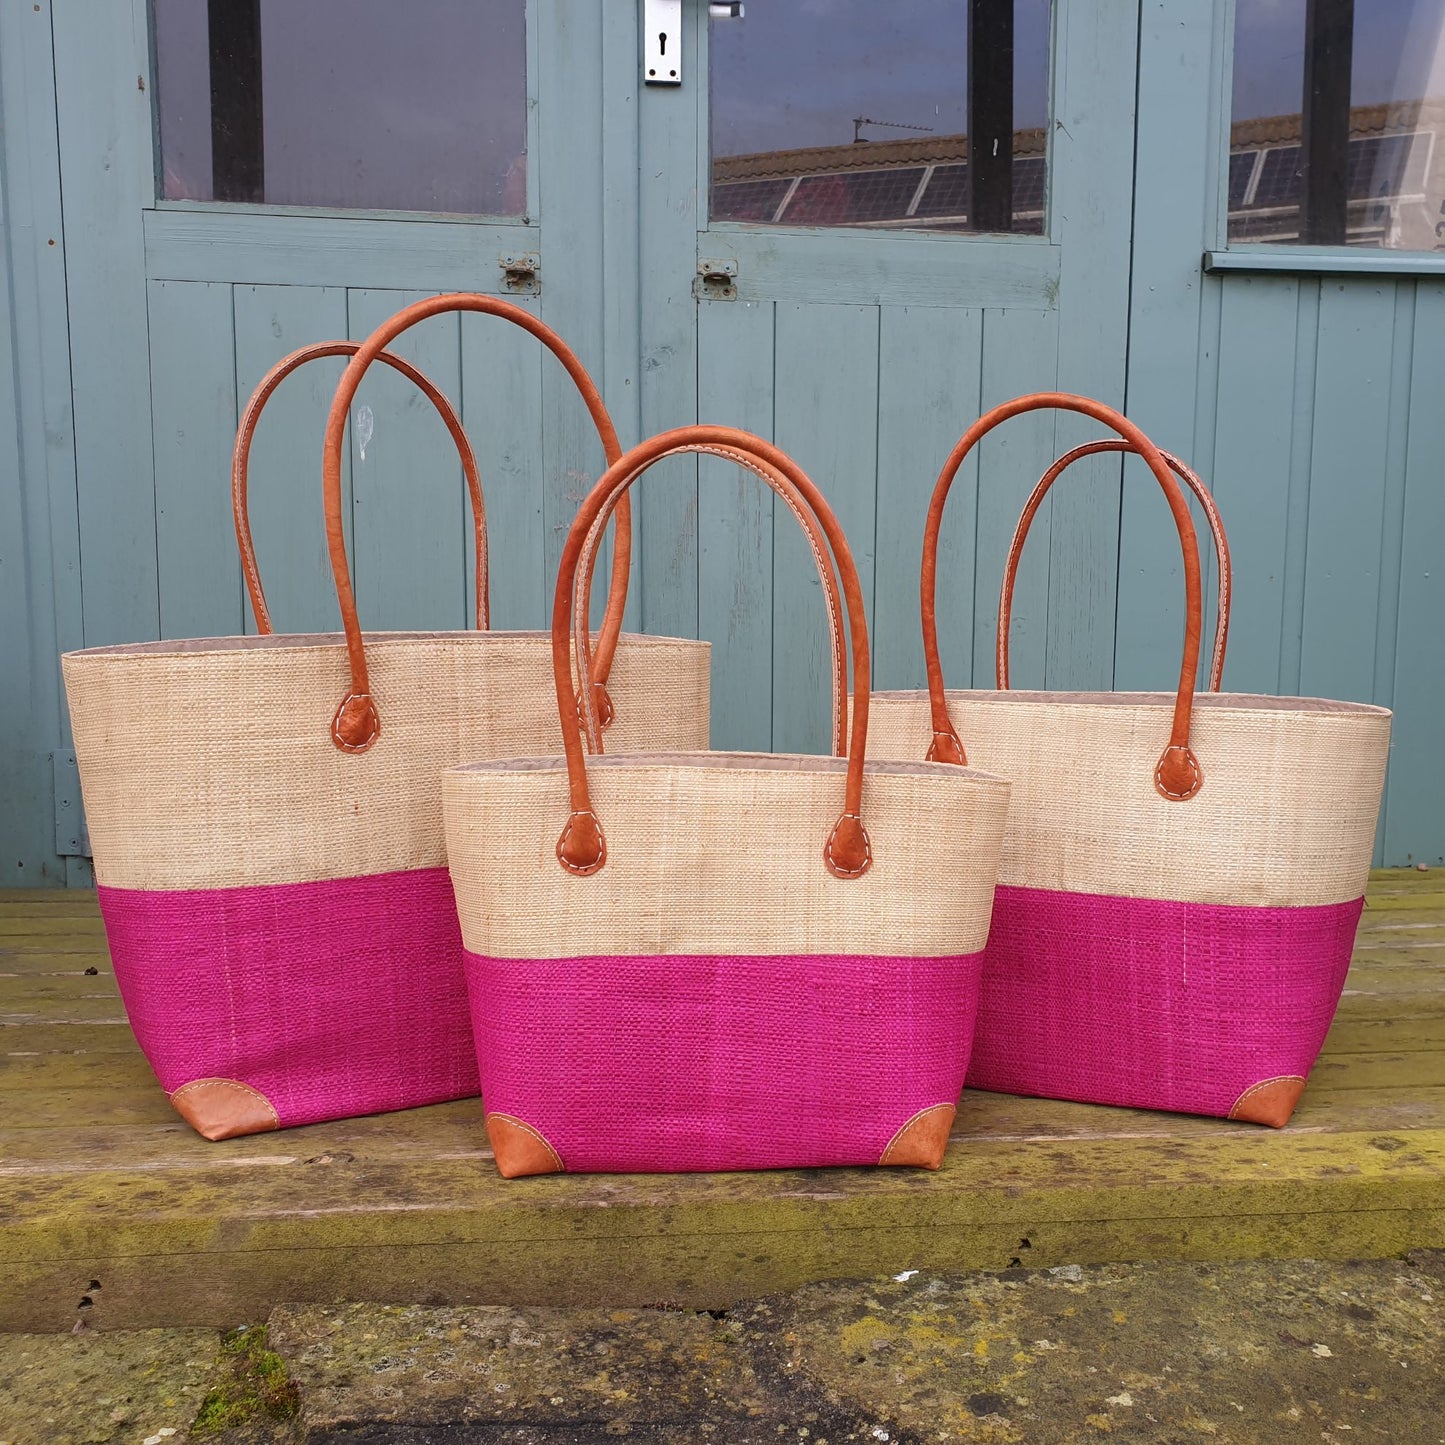 Set of 3 raffia baskets in pink and natural raffia. Small, medium and large with leather handles